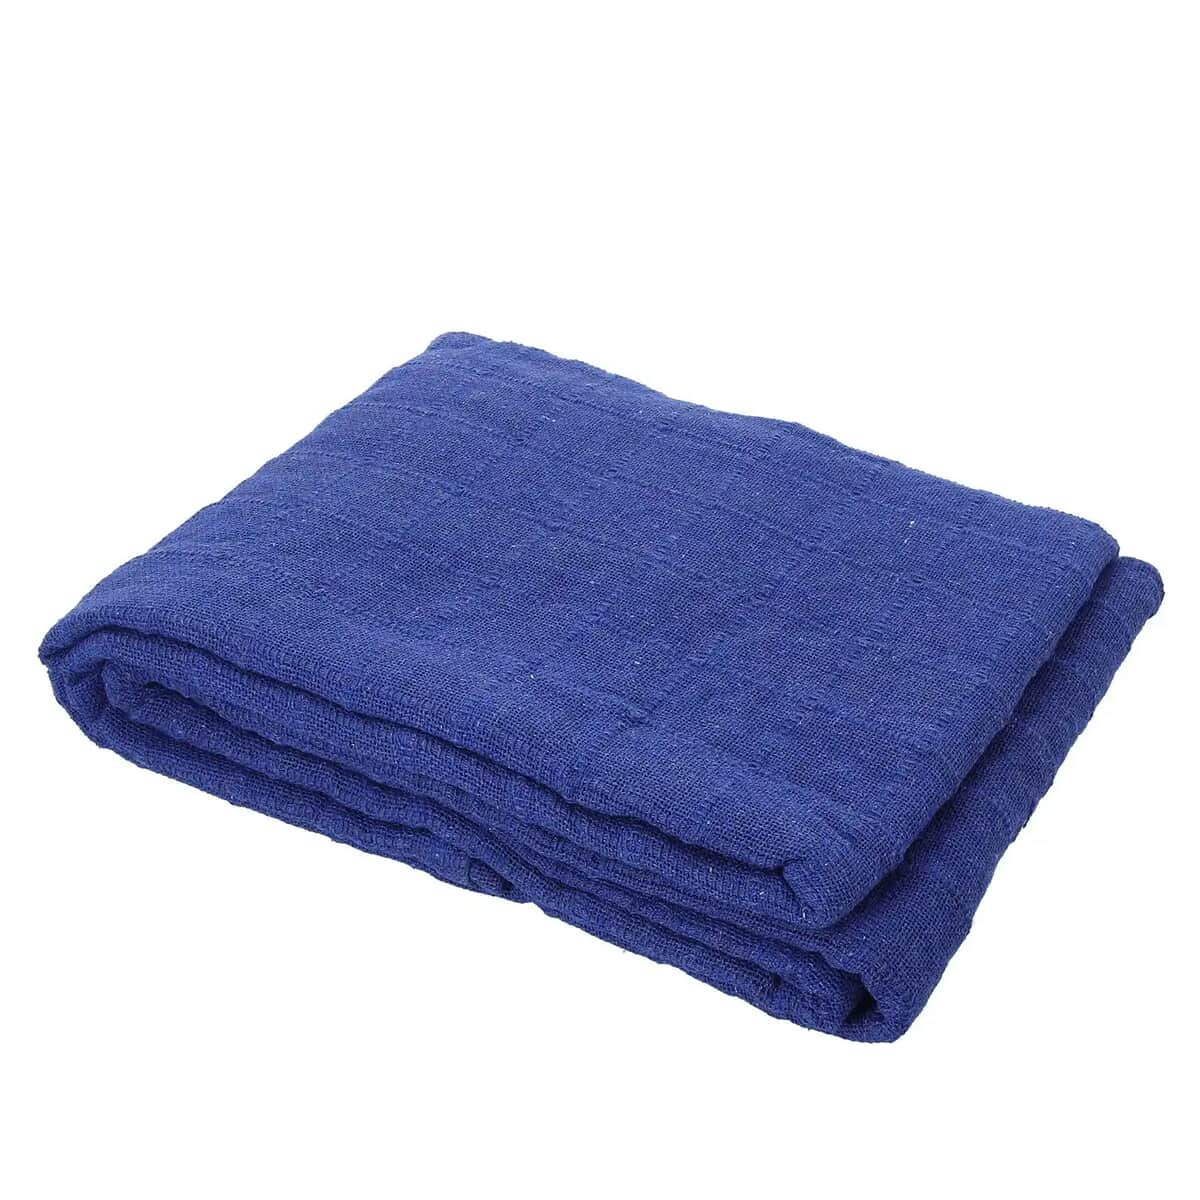 Blue Square Button Pattern Throw Blanket (Cotton) image number 0